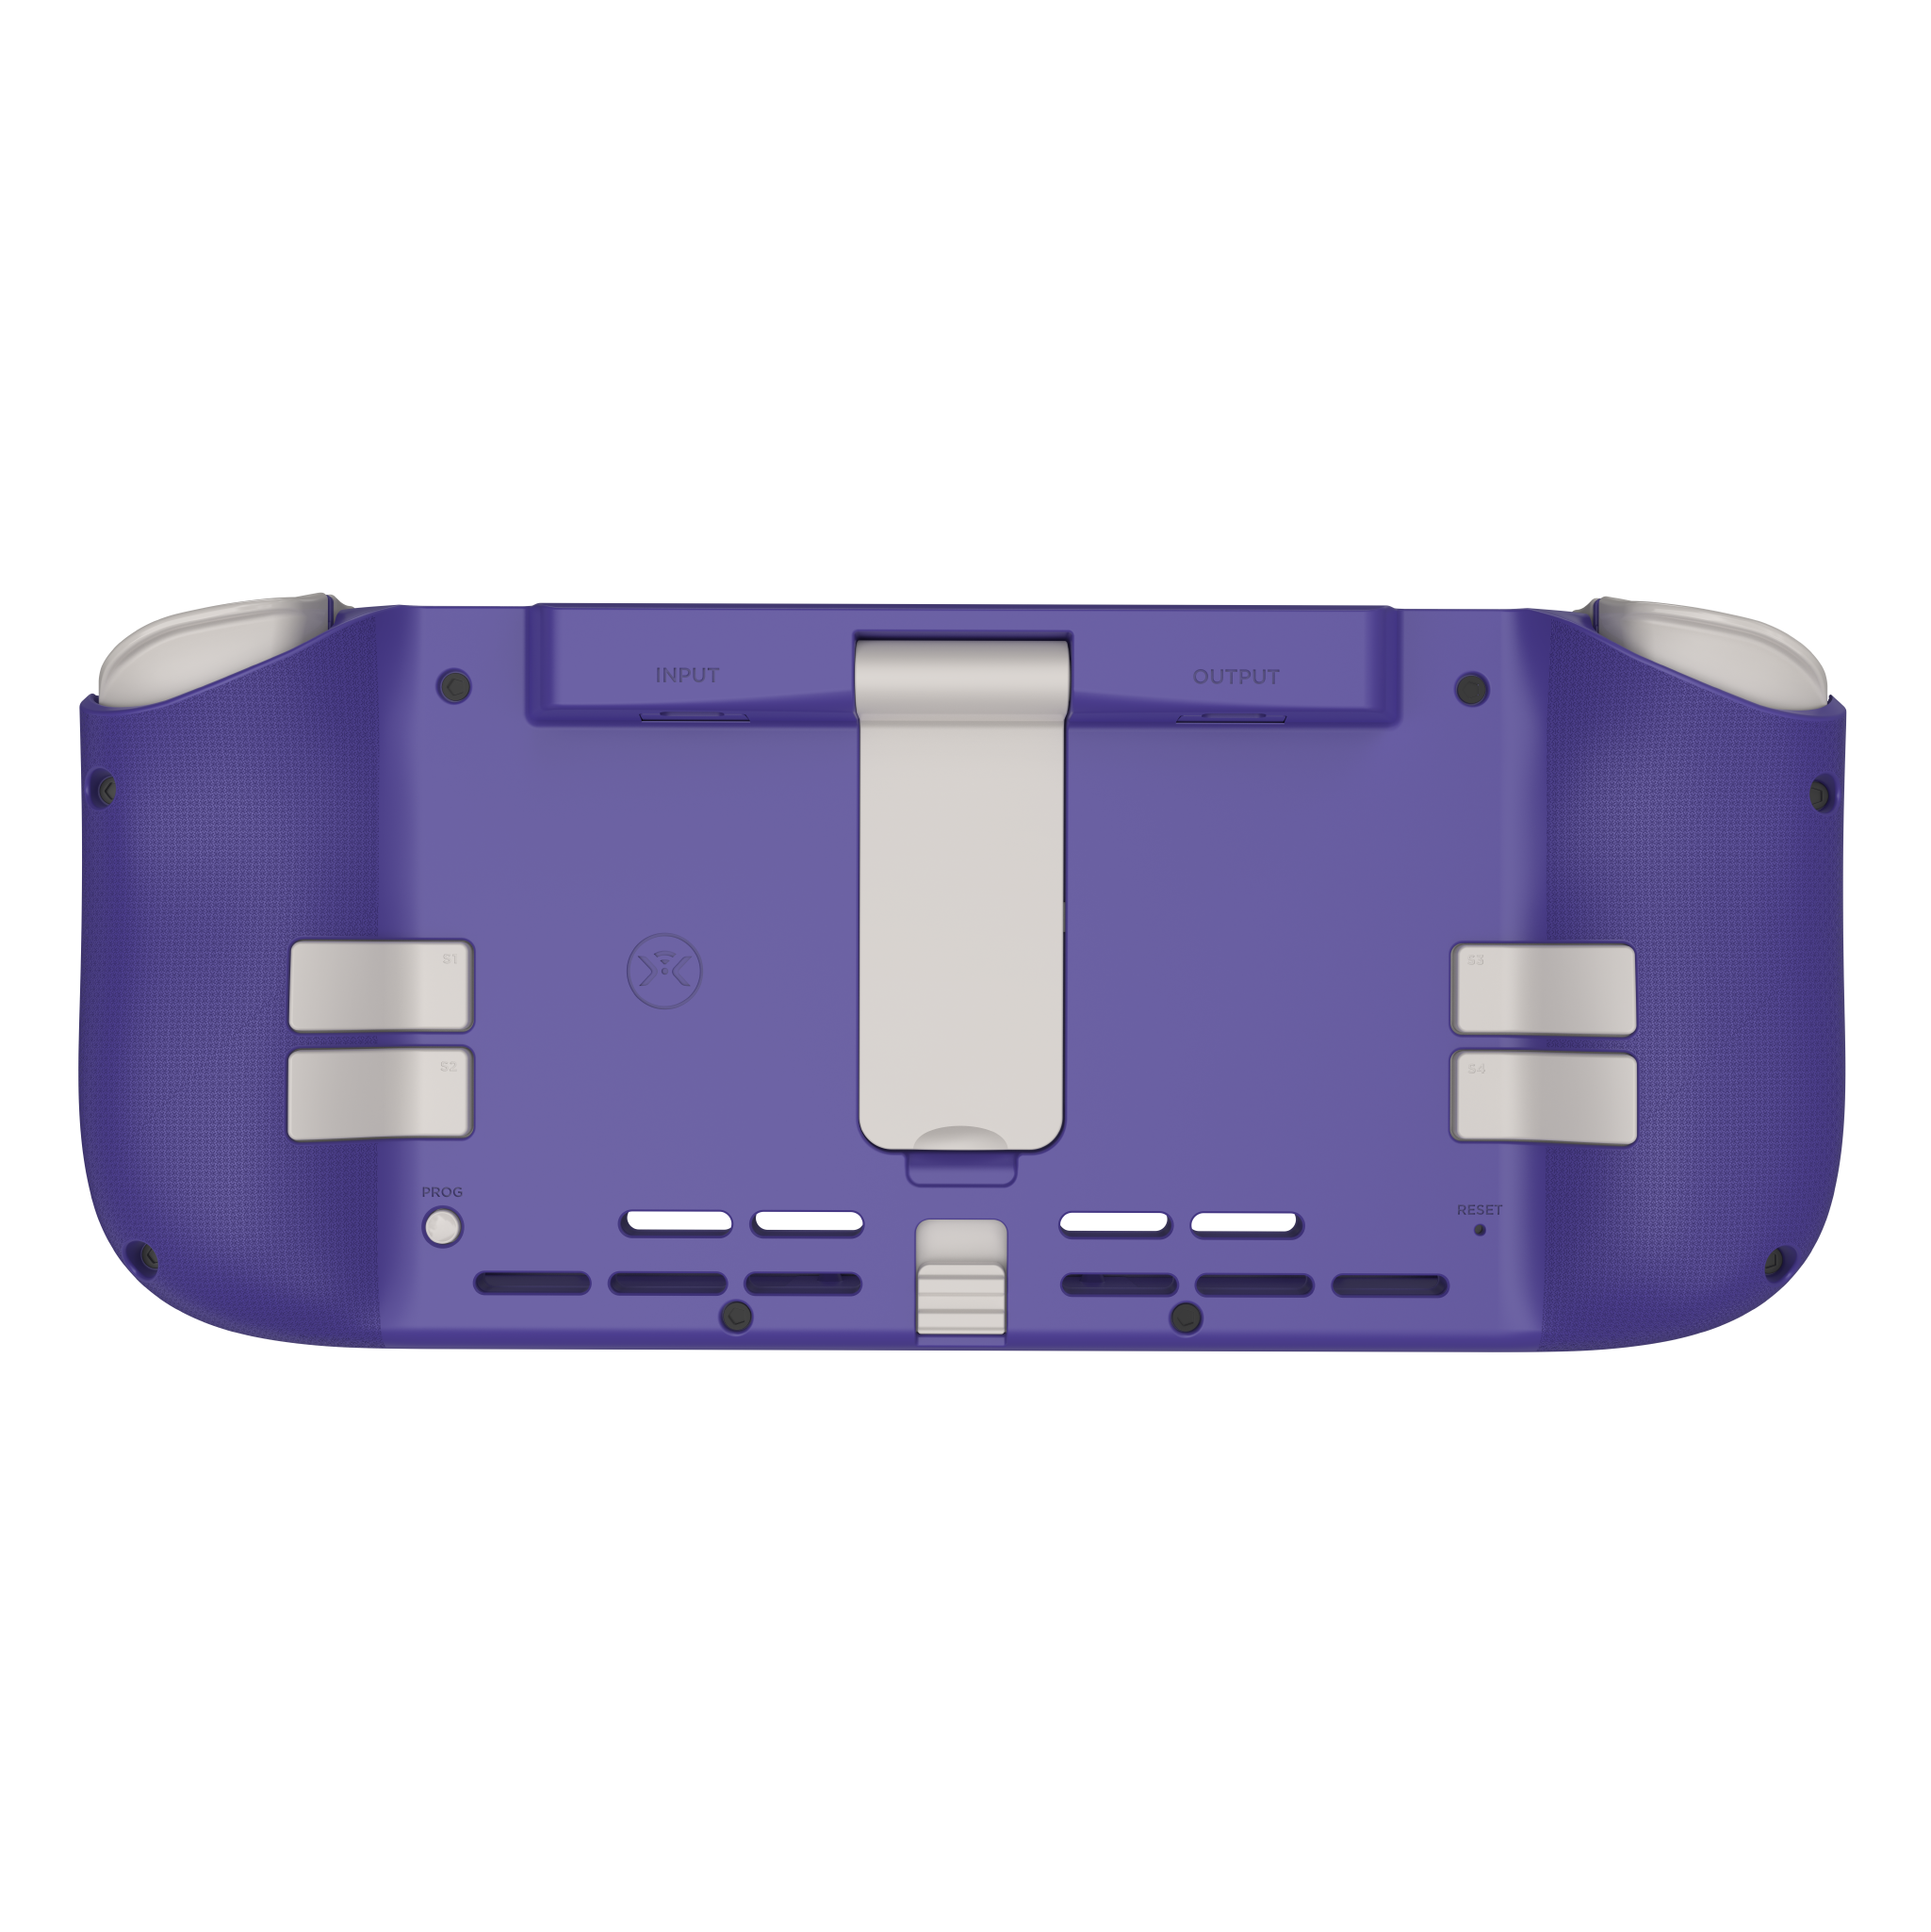 Nitro Deck Retro Purple Limited Edition with Carry Case